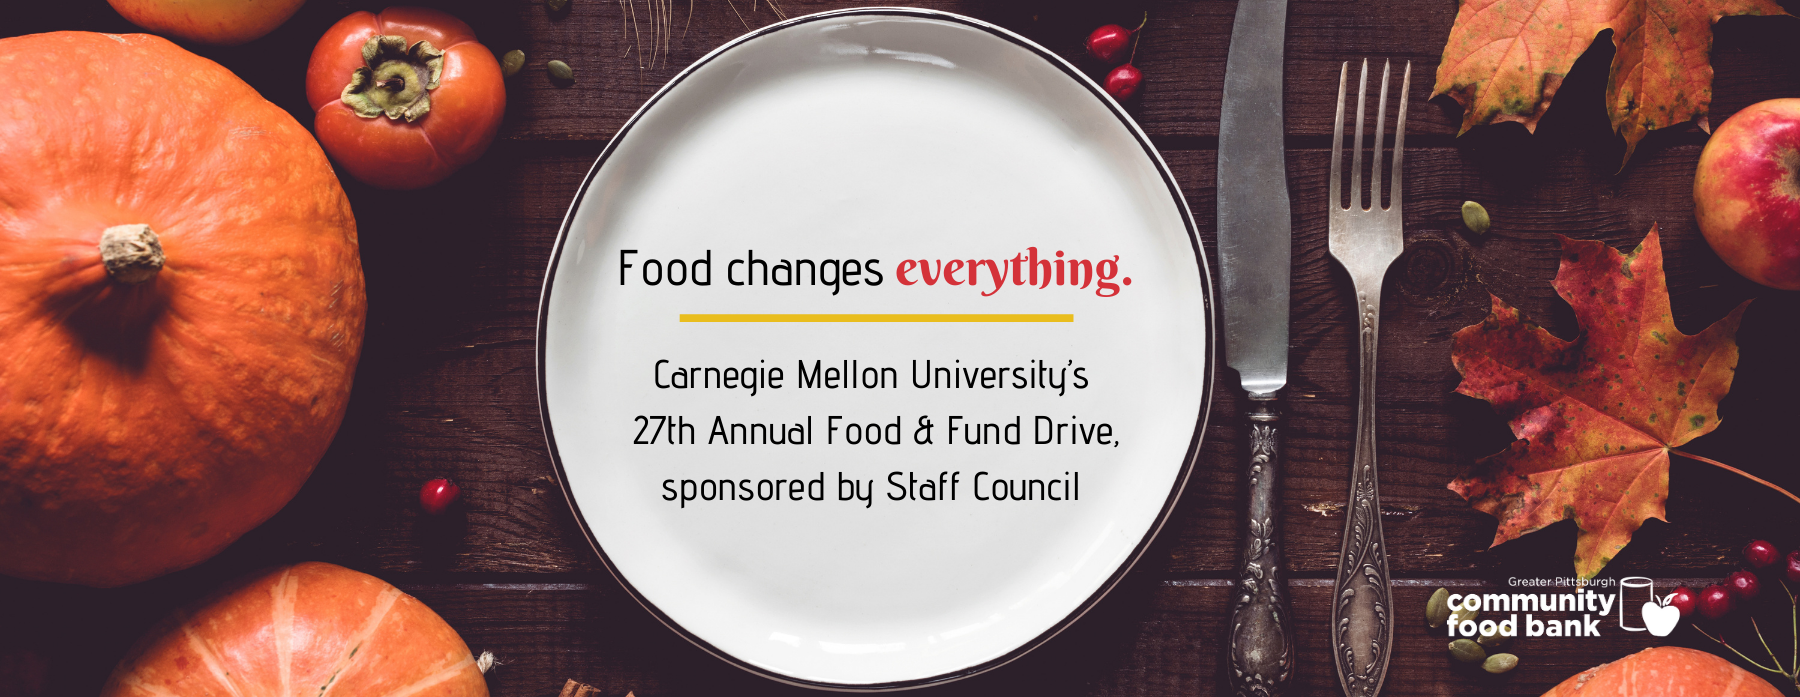 Carnegie Mellon University’s 27th Annual Food  & Fund Drive, sponsored by Staff Council